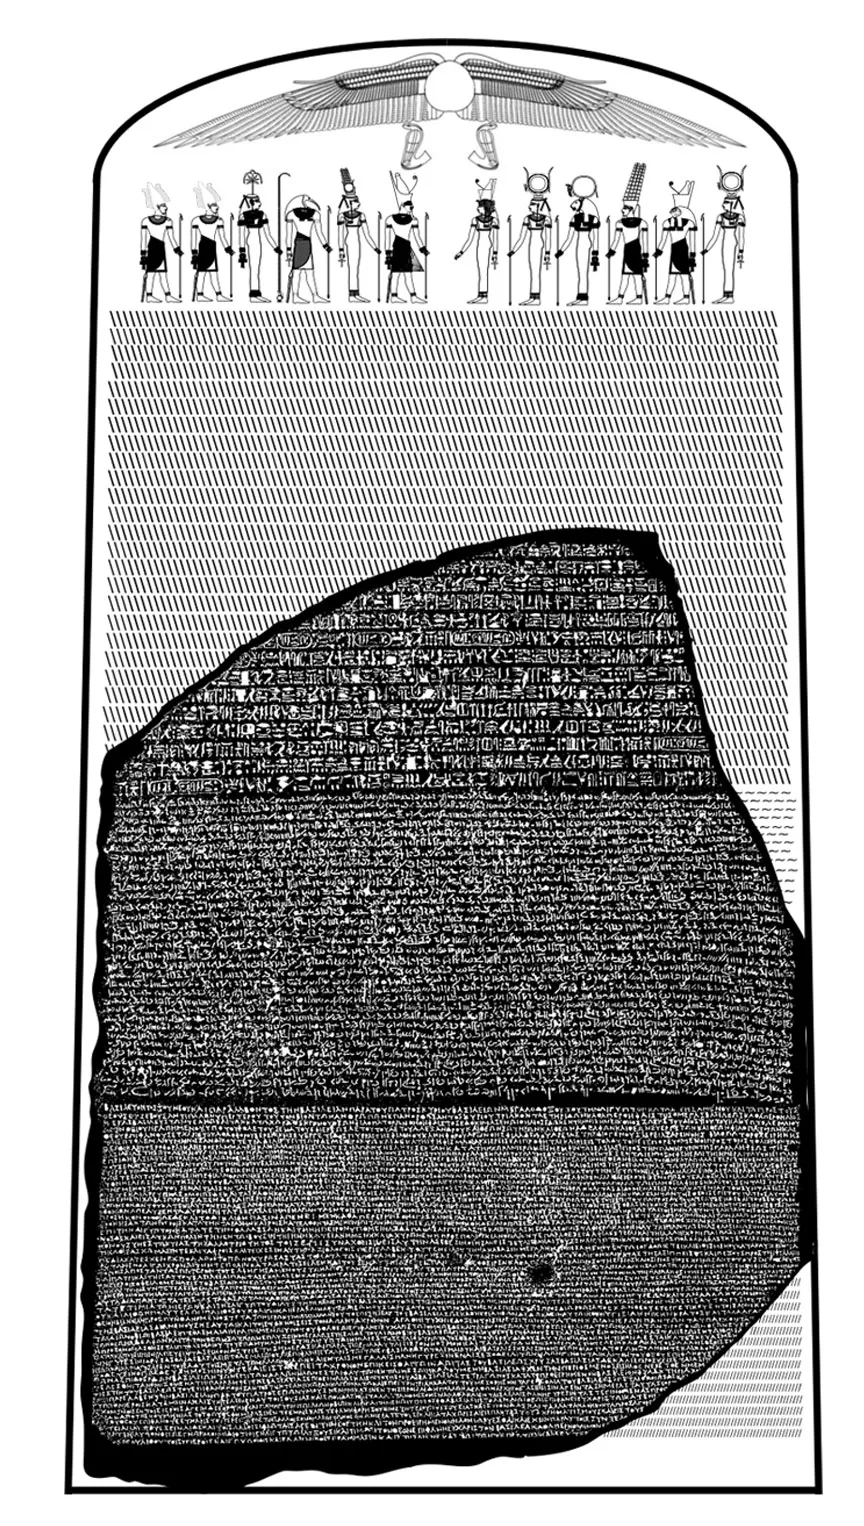 Two Hundred Years Ago, the Rosetta Stone Unlocked the Secrets of Ancient Egypt